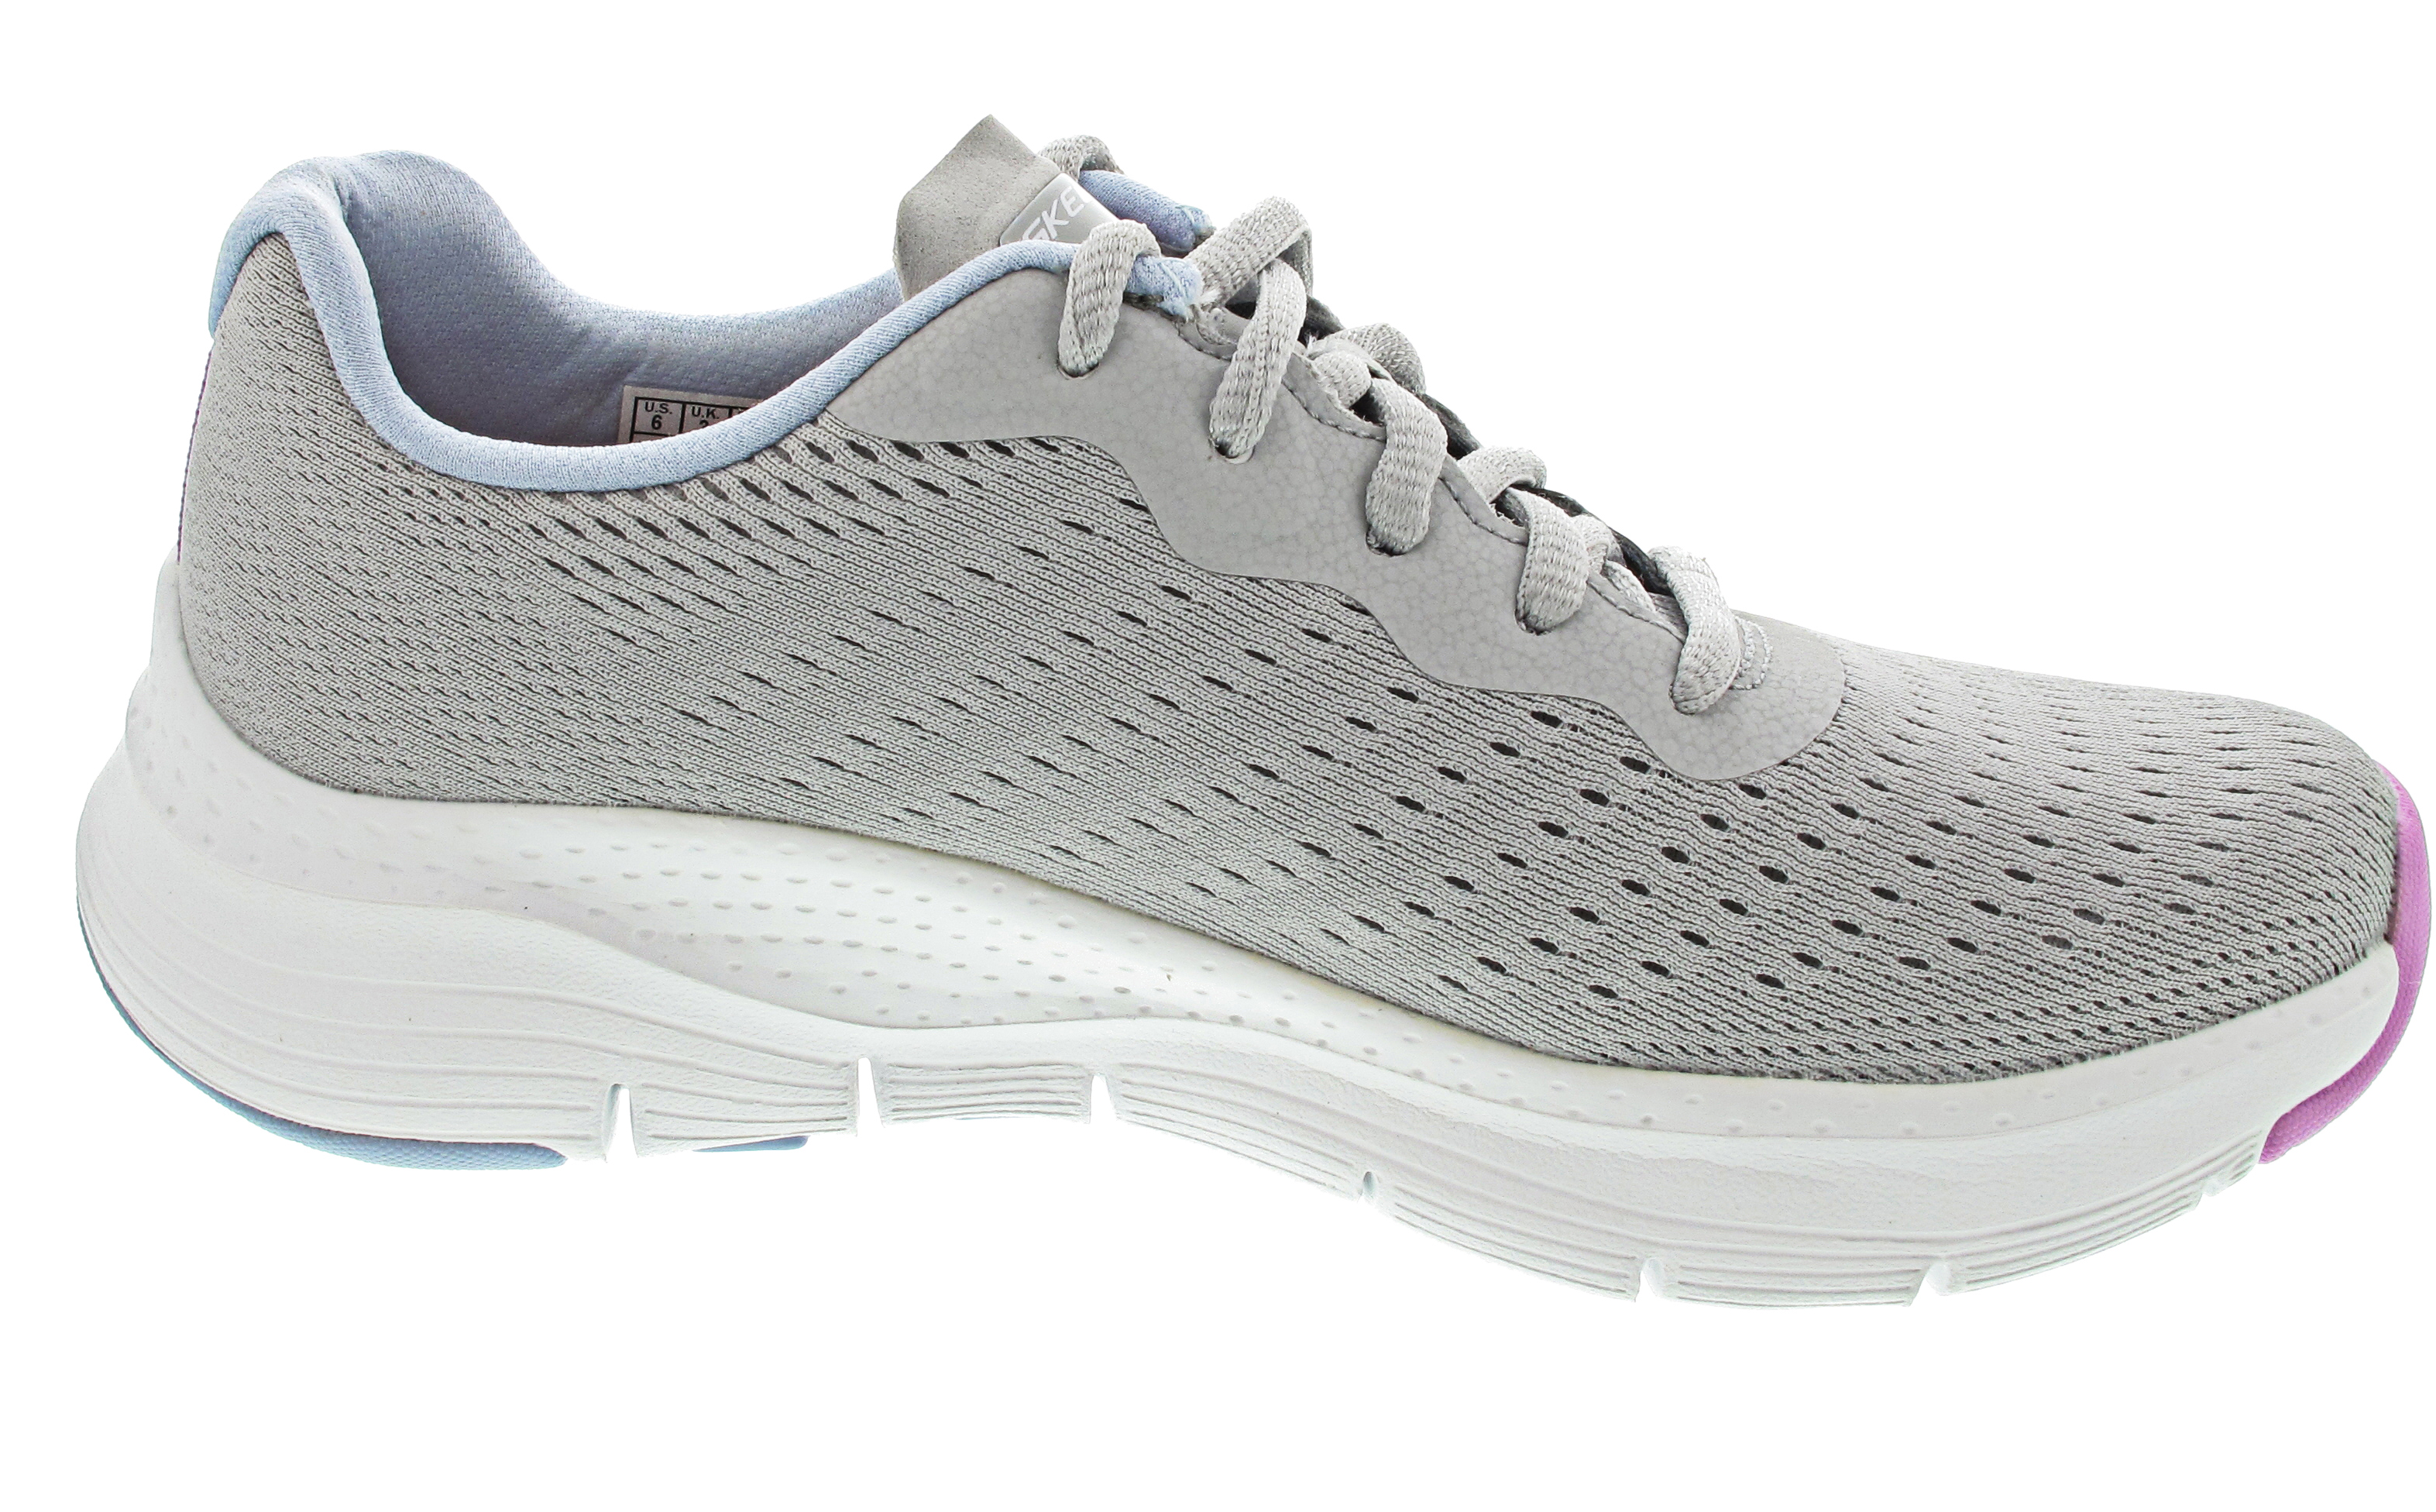 Skechers Arch Fit-Infinity Cool